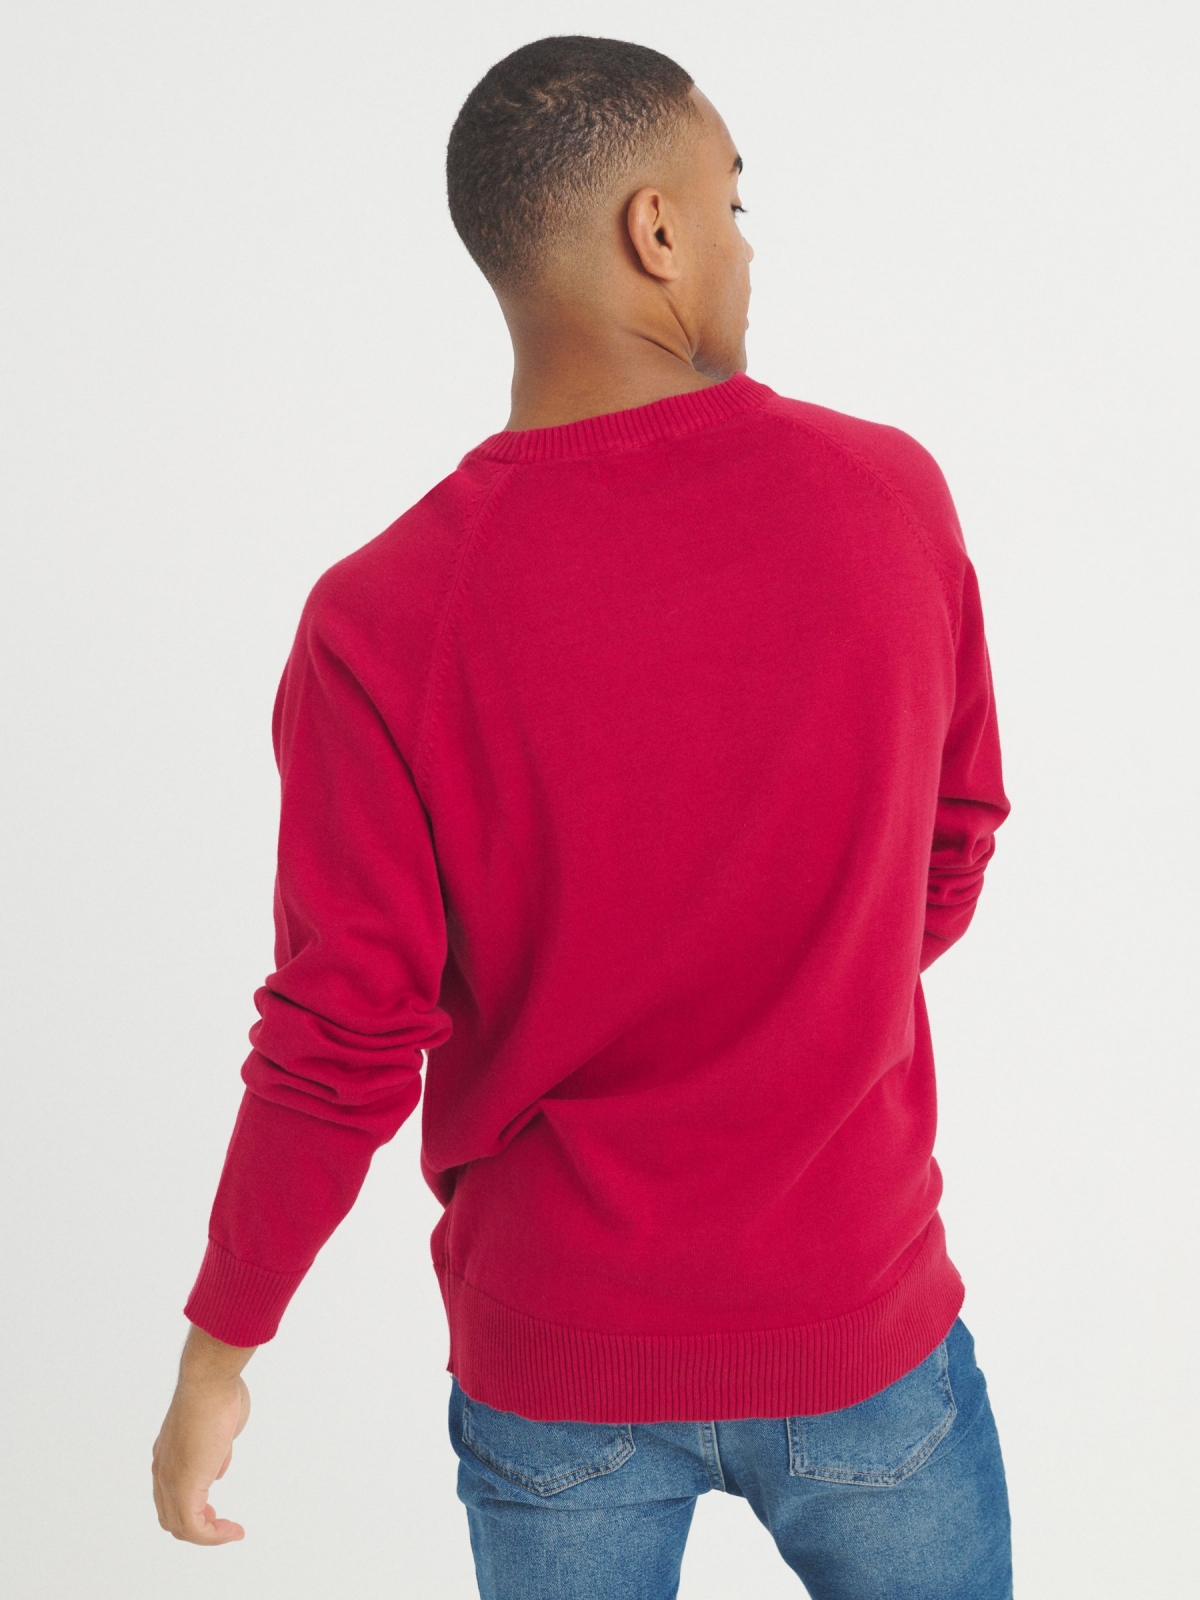 Plain sweater round neck red middle back view